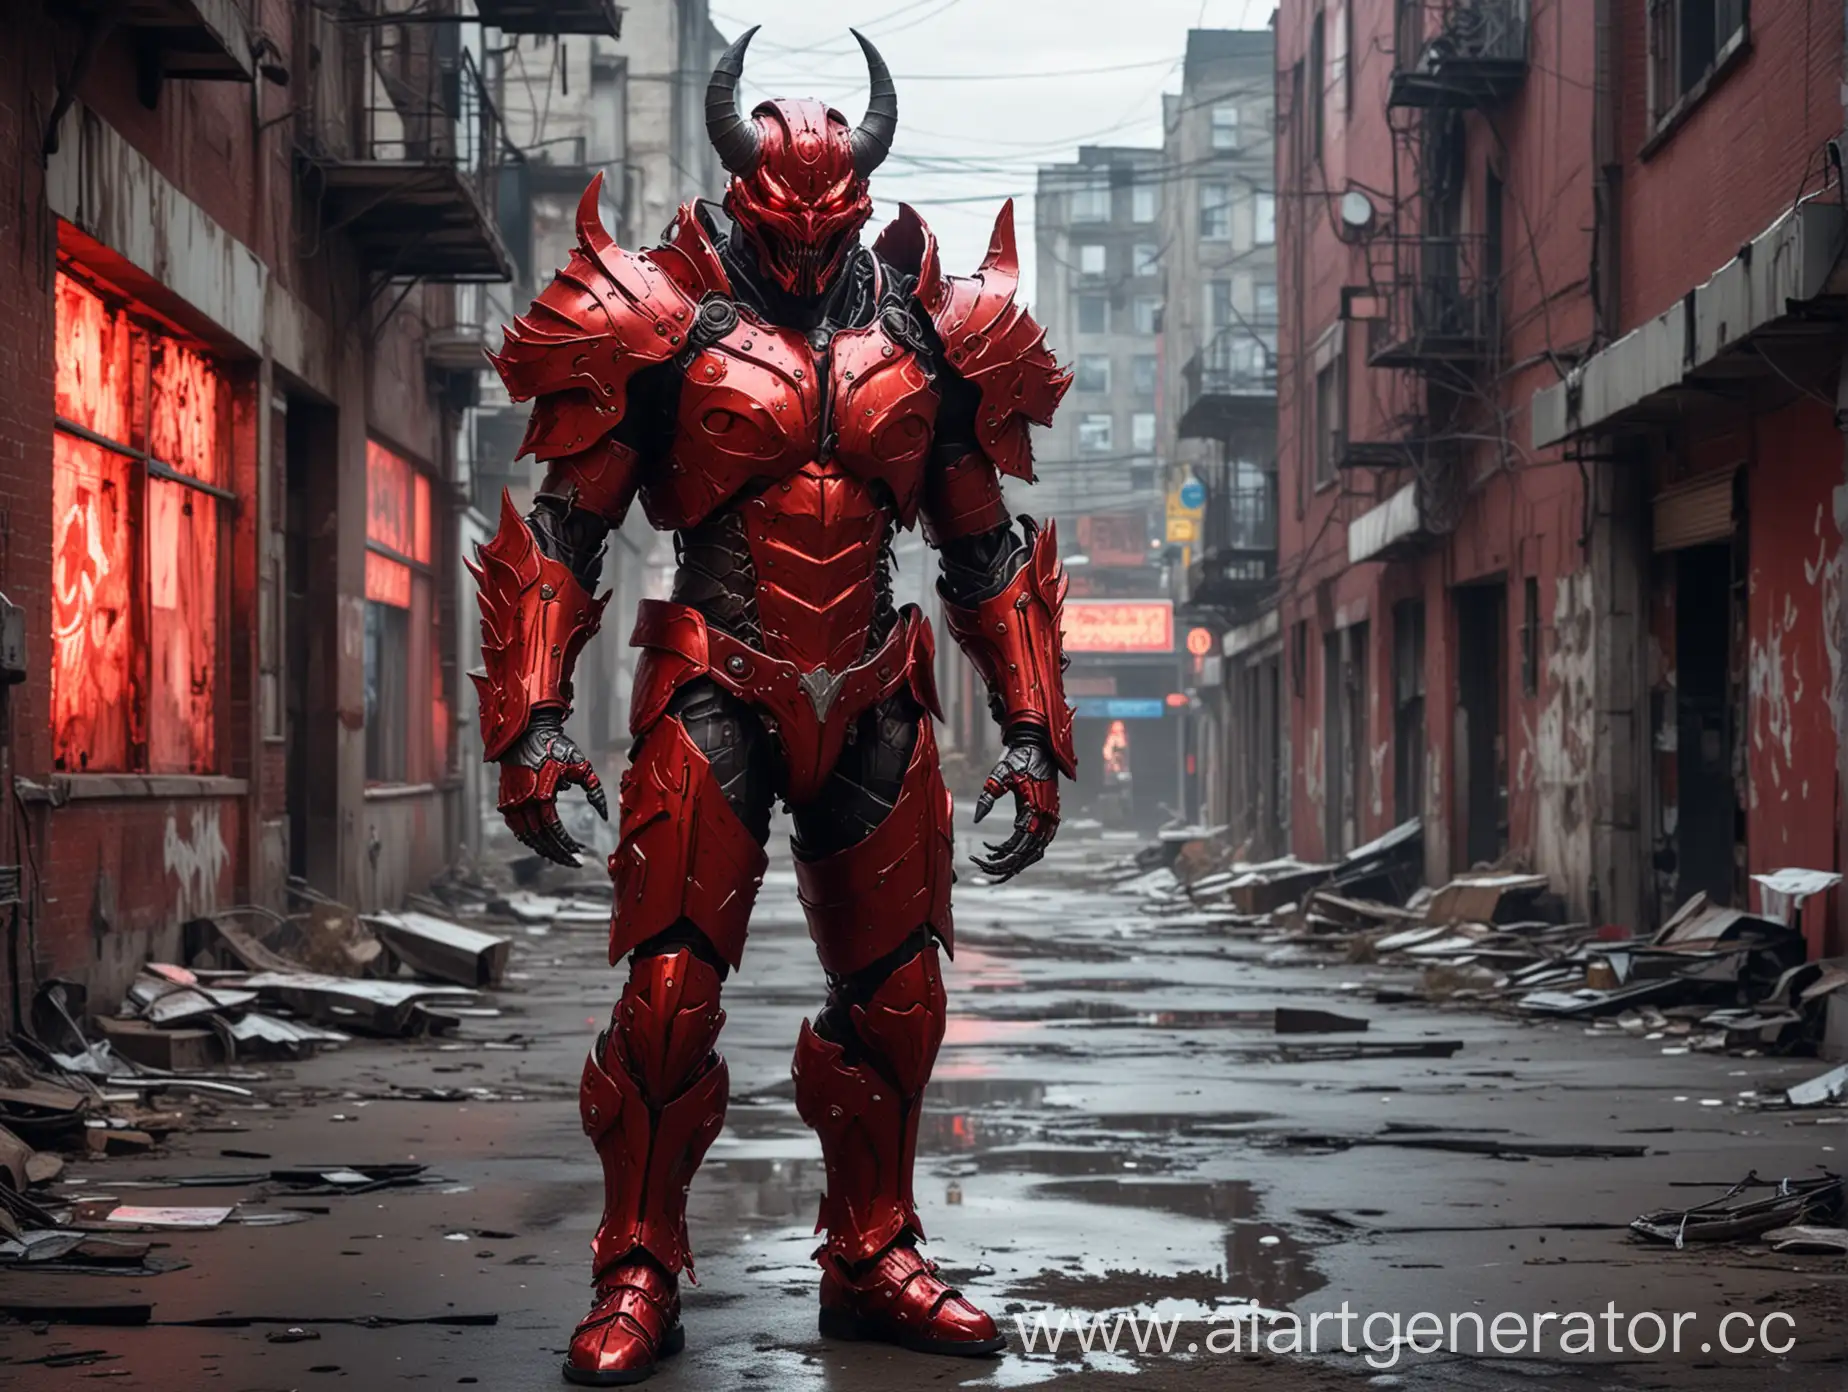 ChromePlated-Red-Armored-Demon-in-Neon-Abandoned-City